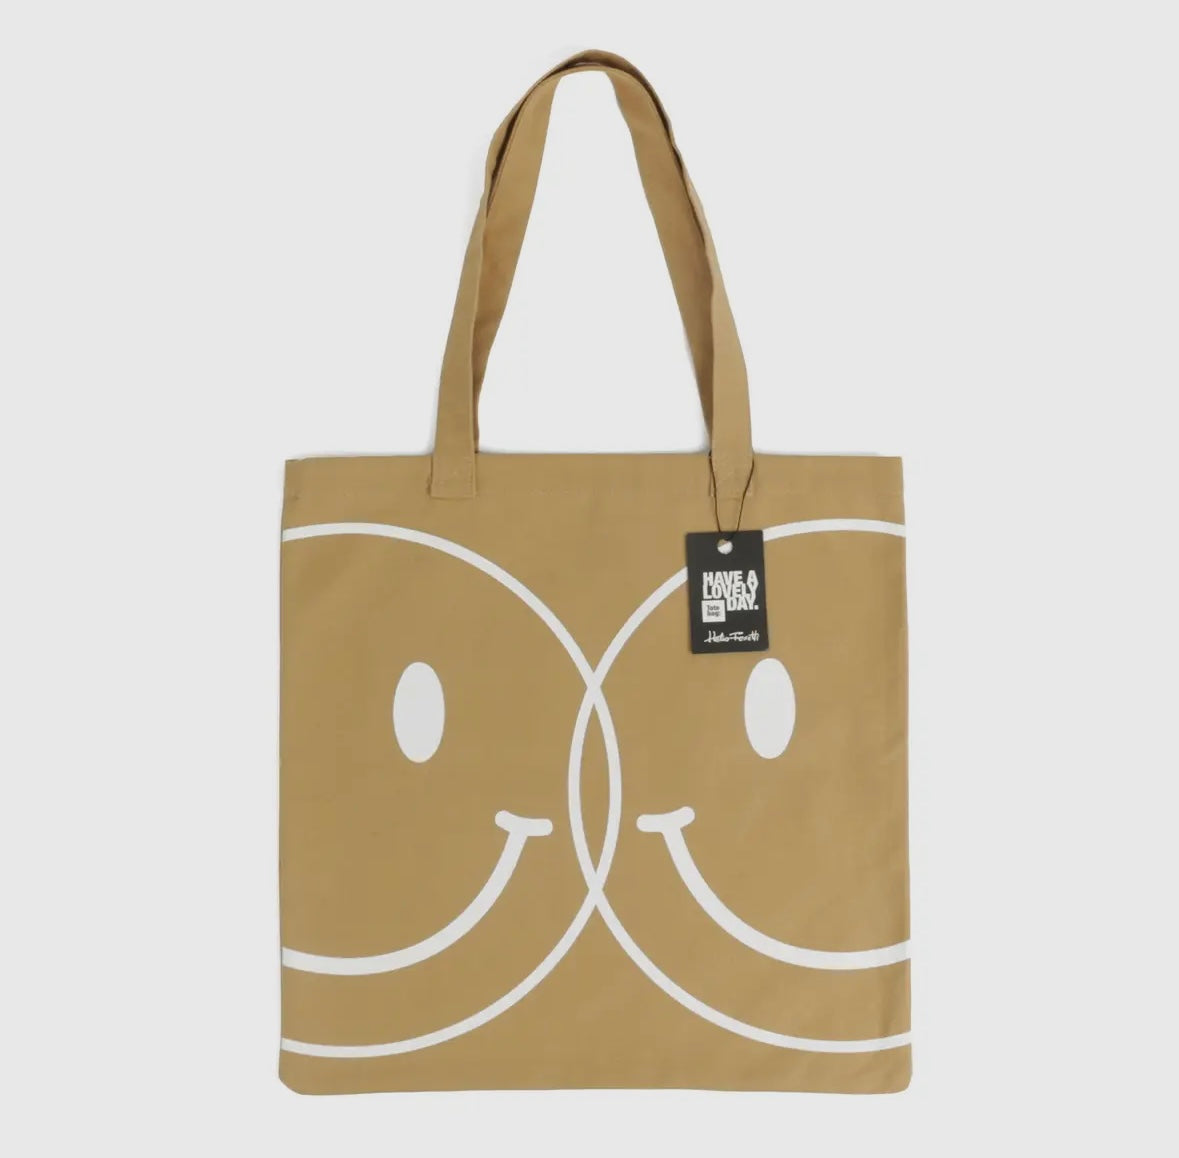 Lovely day tote bag